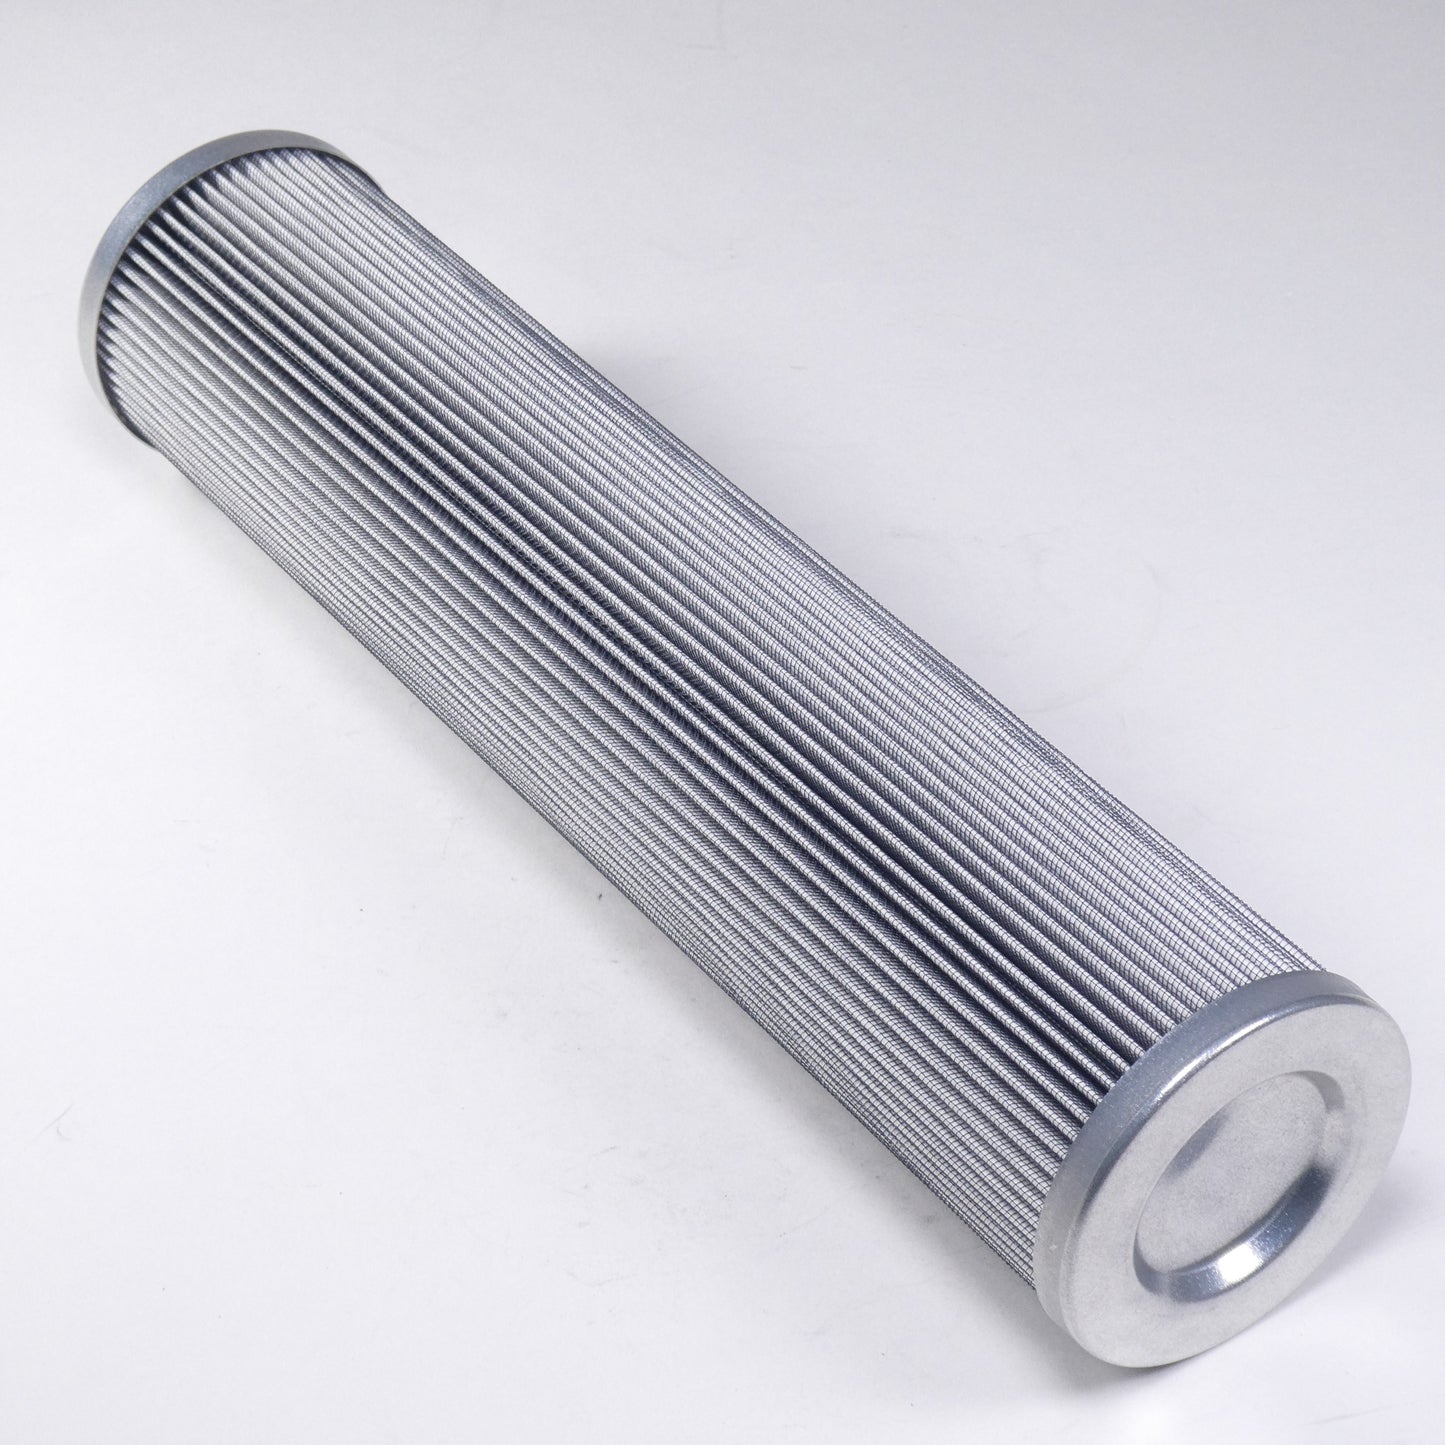 Hydrafil Replacement Filter Element for GMC 23018853